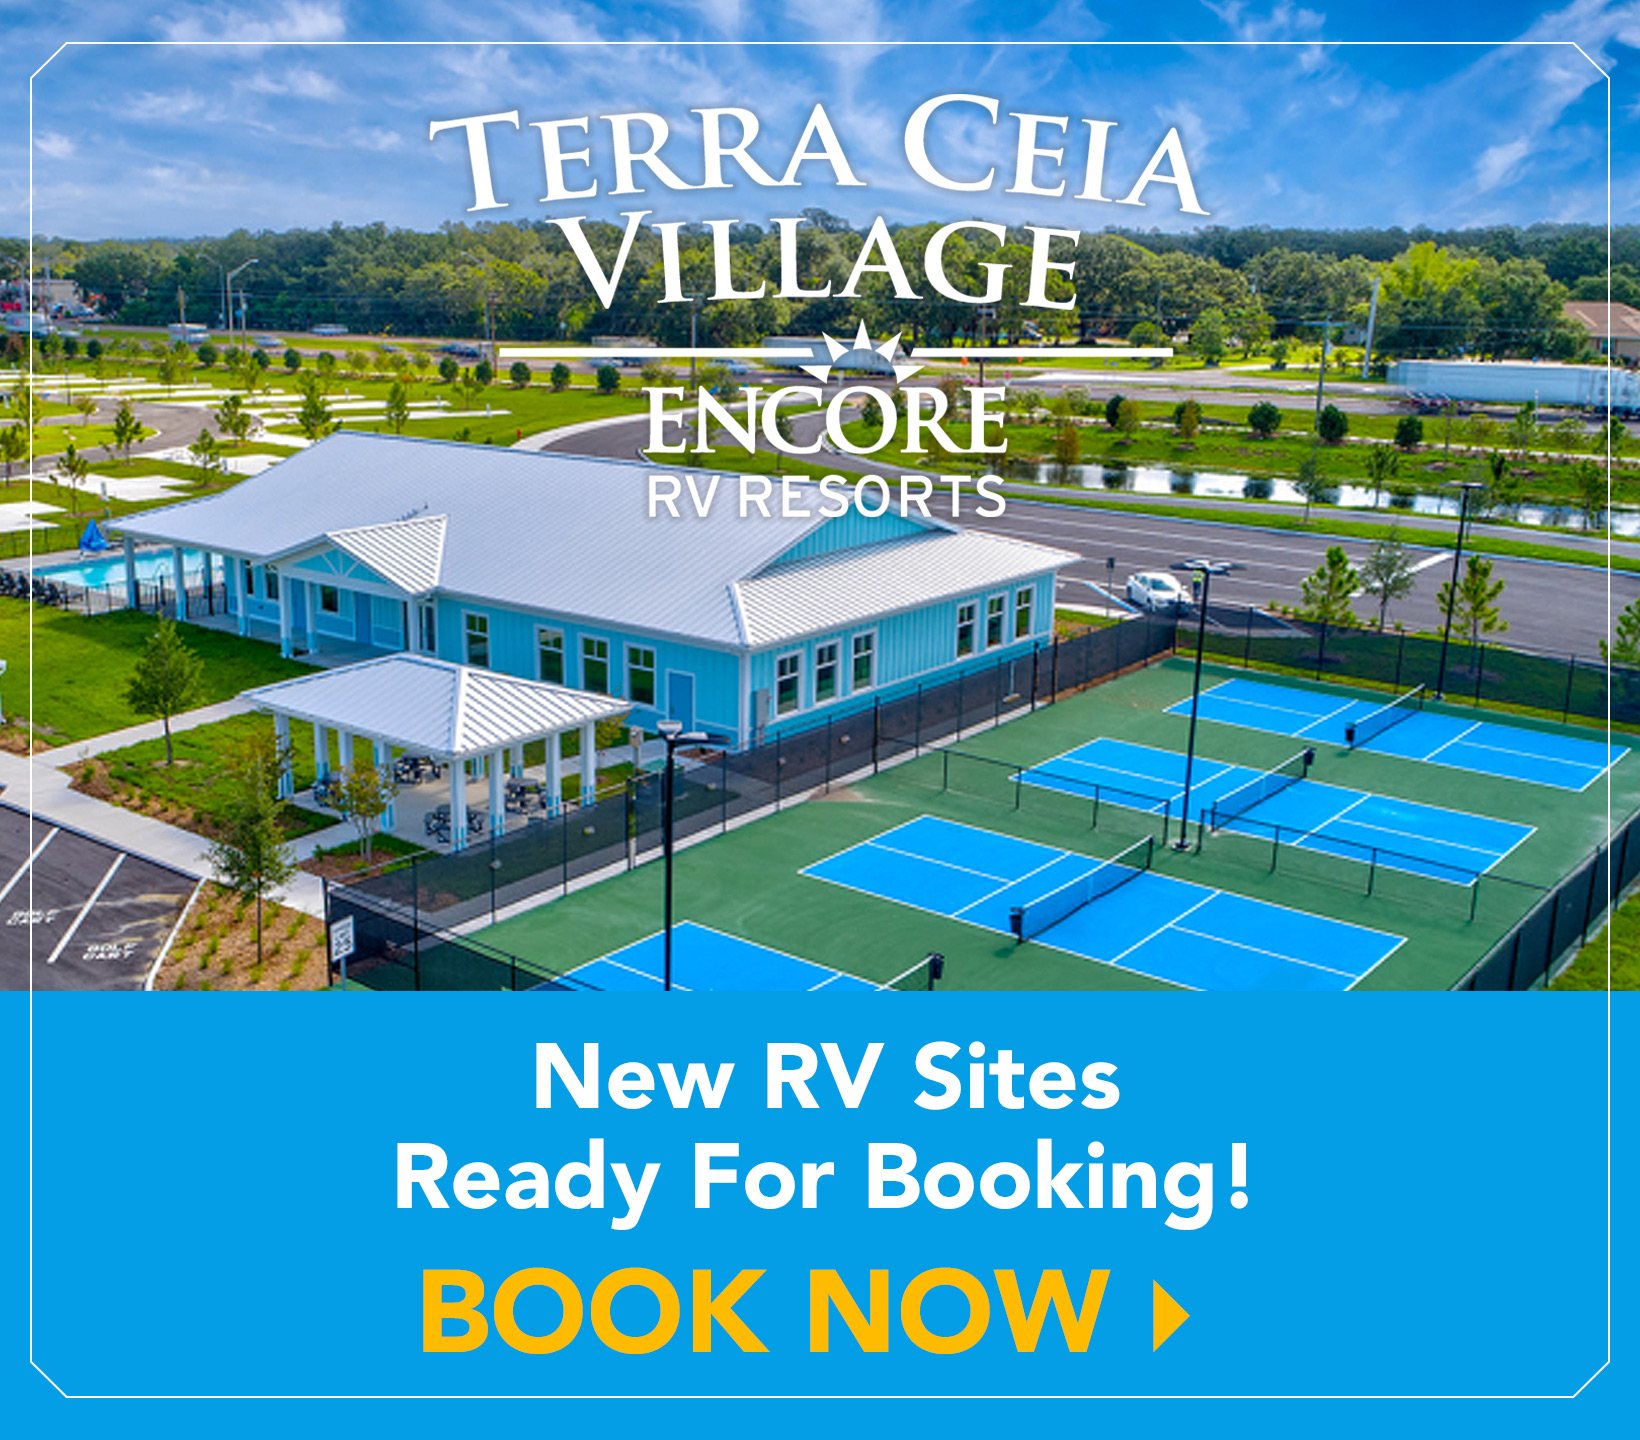 New RV Sites ready for booking at Terra Ceia! Book Now!